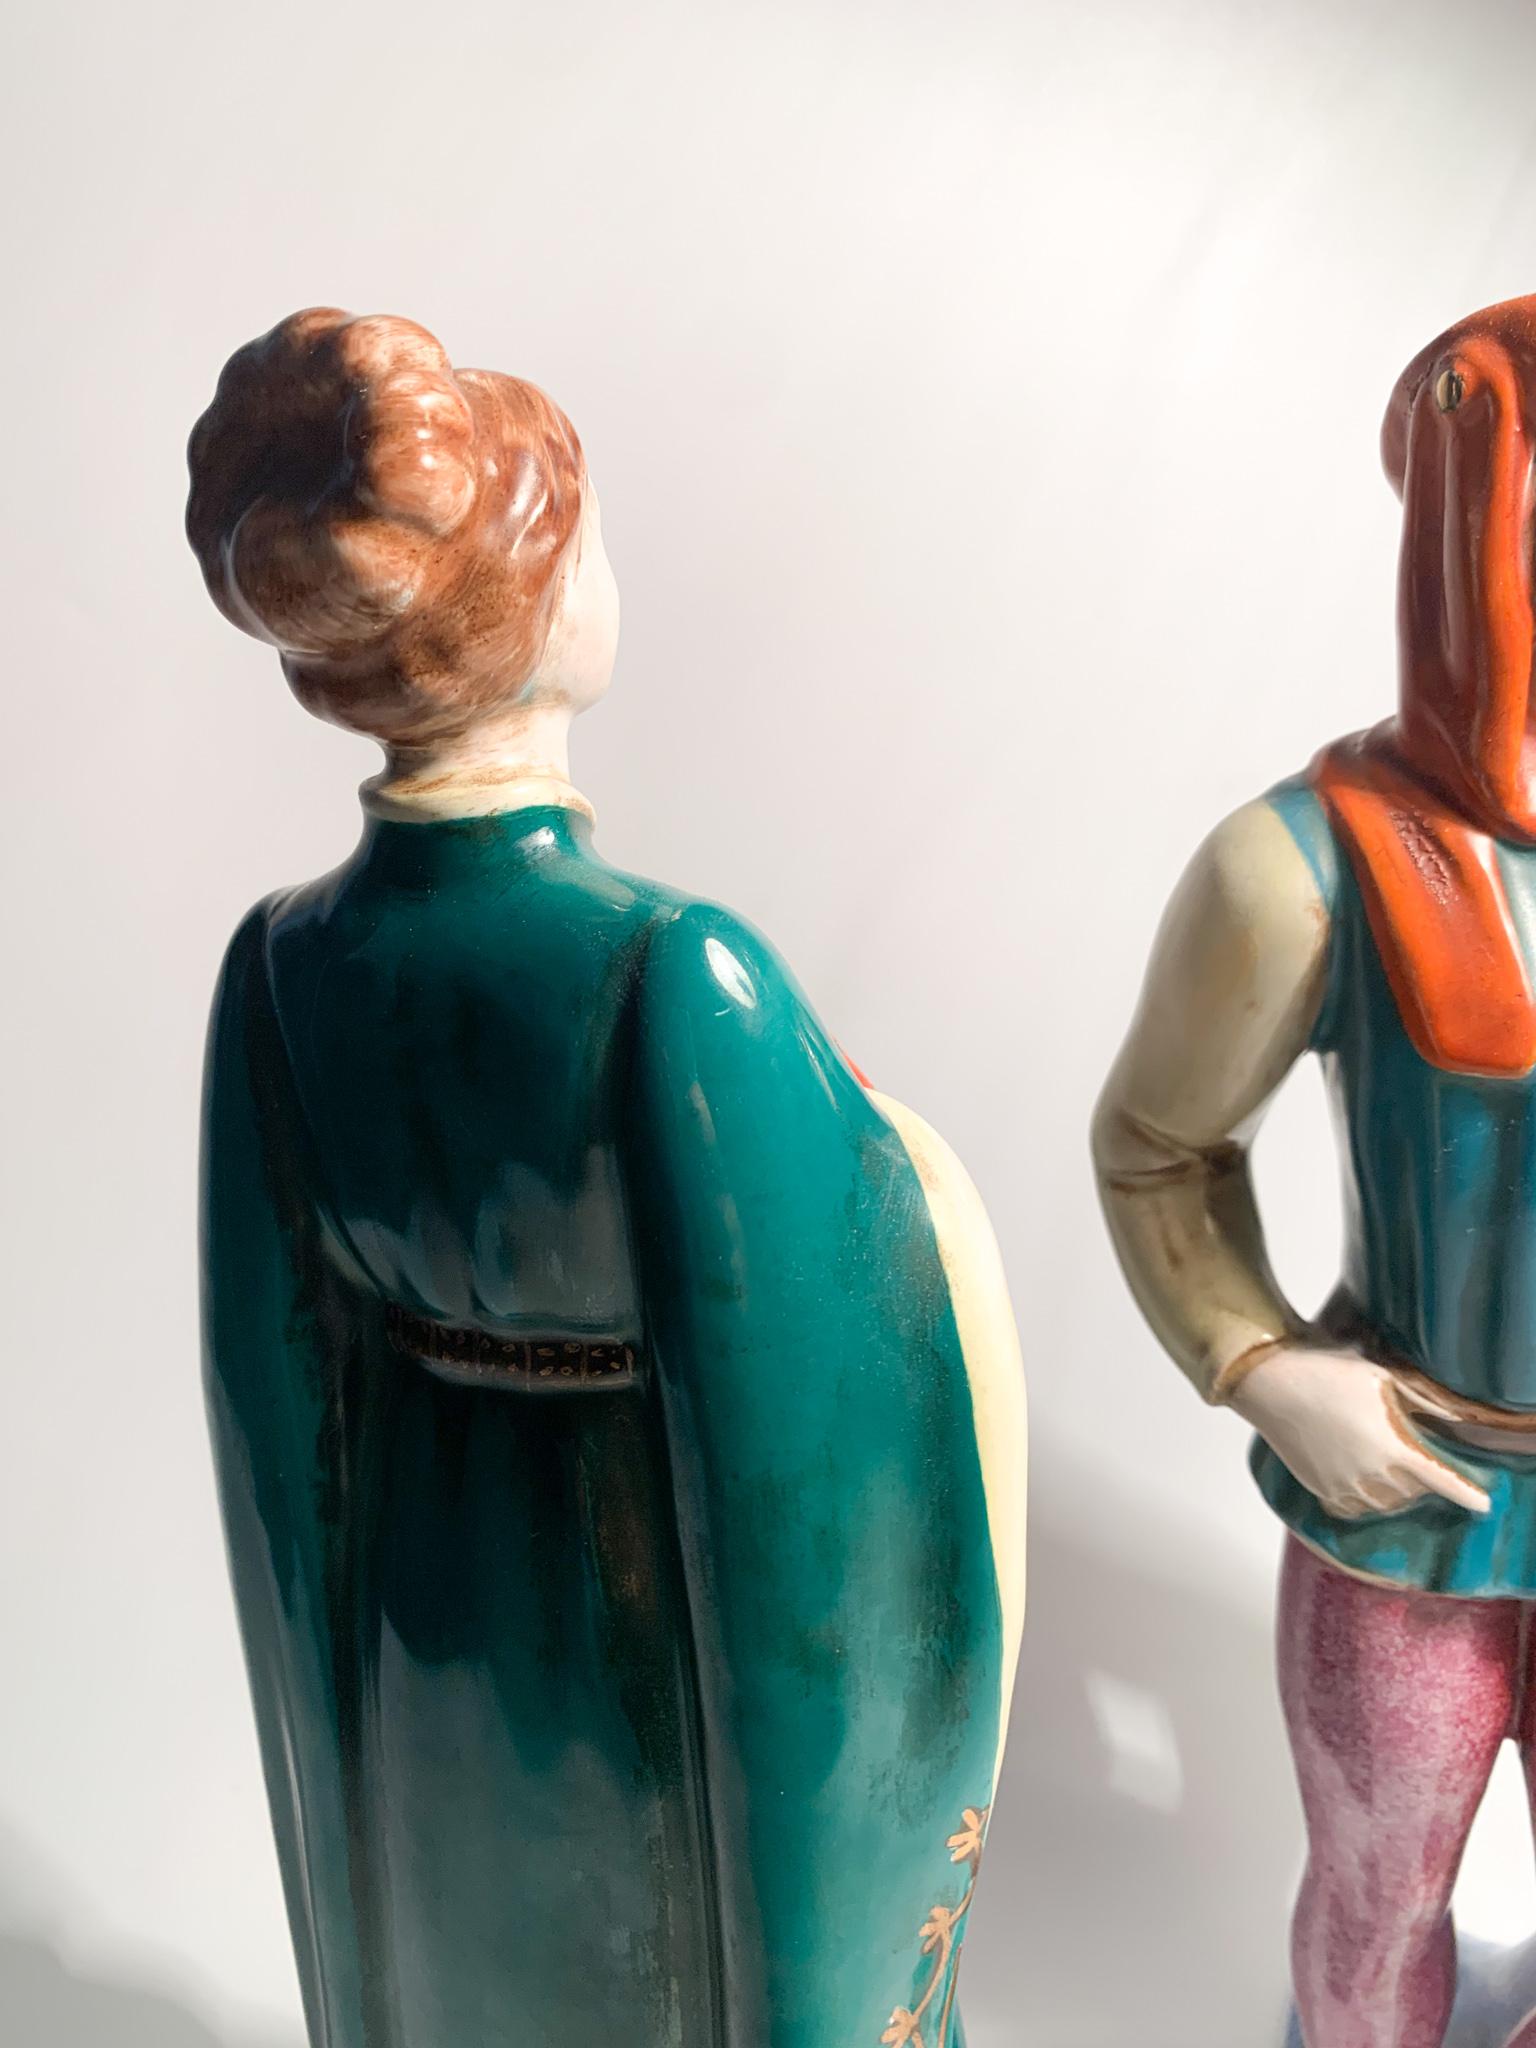 Pair of Statues of a Lady and a Gentleman in Ceramic by Zaccagnini 1940 For Sale 2